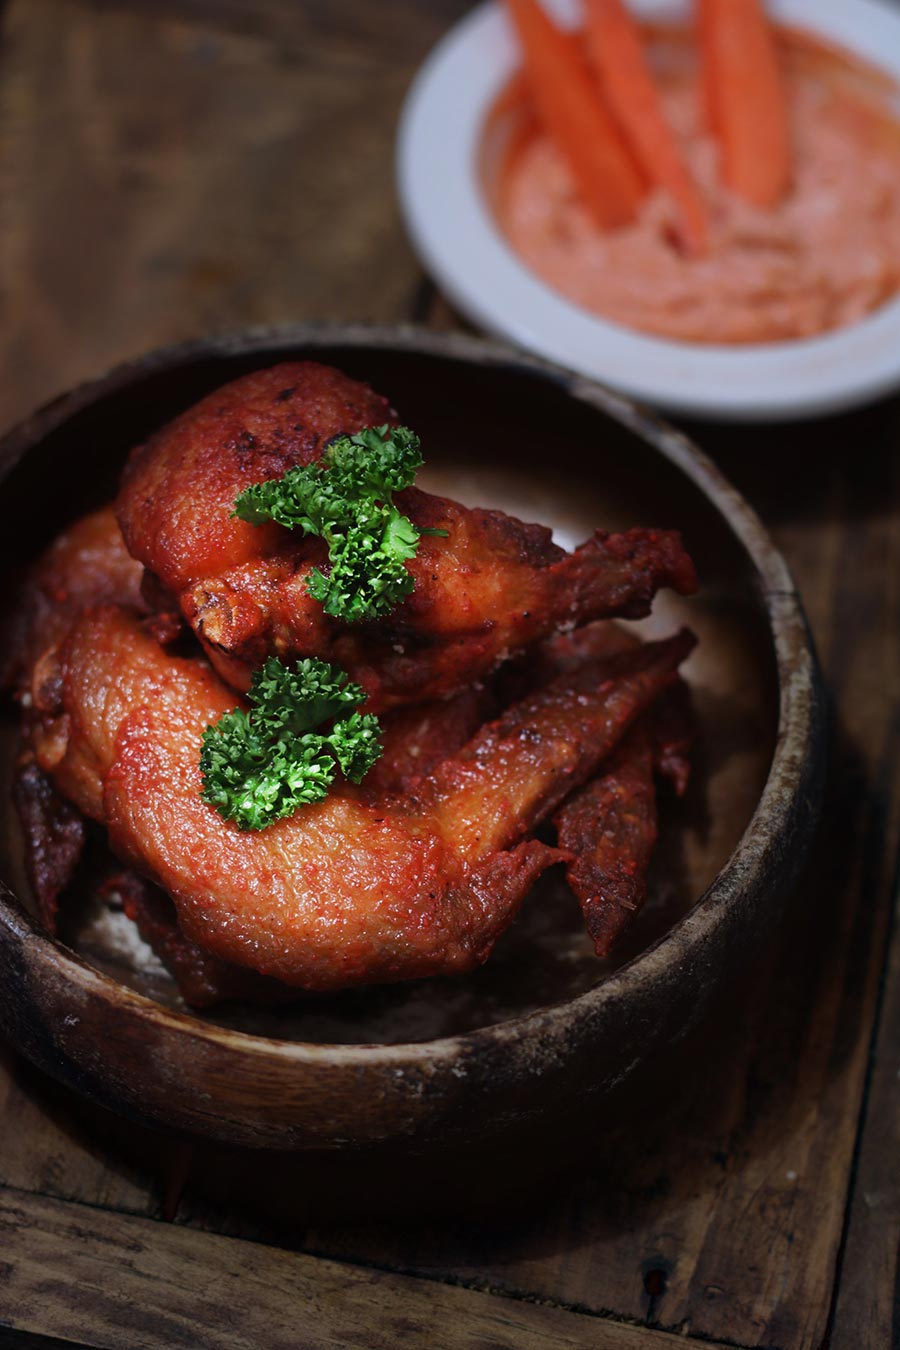 Chicken wings. Photo by Eiliv Aceron on Unsplash